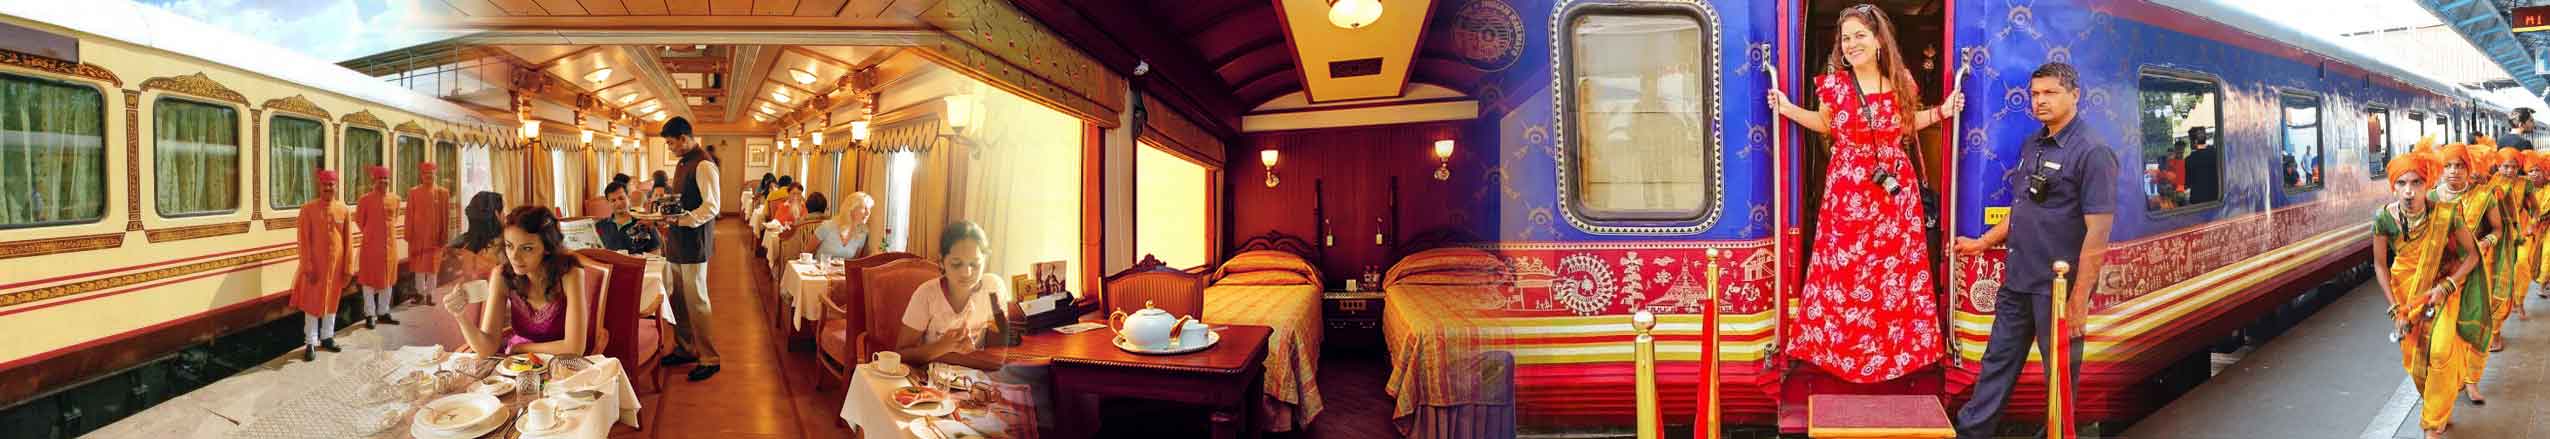 Fairy Queen Train Packages